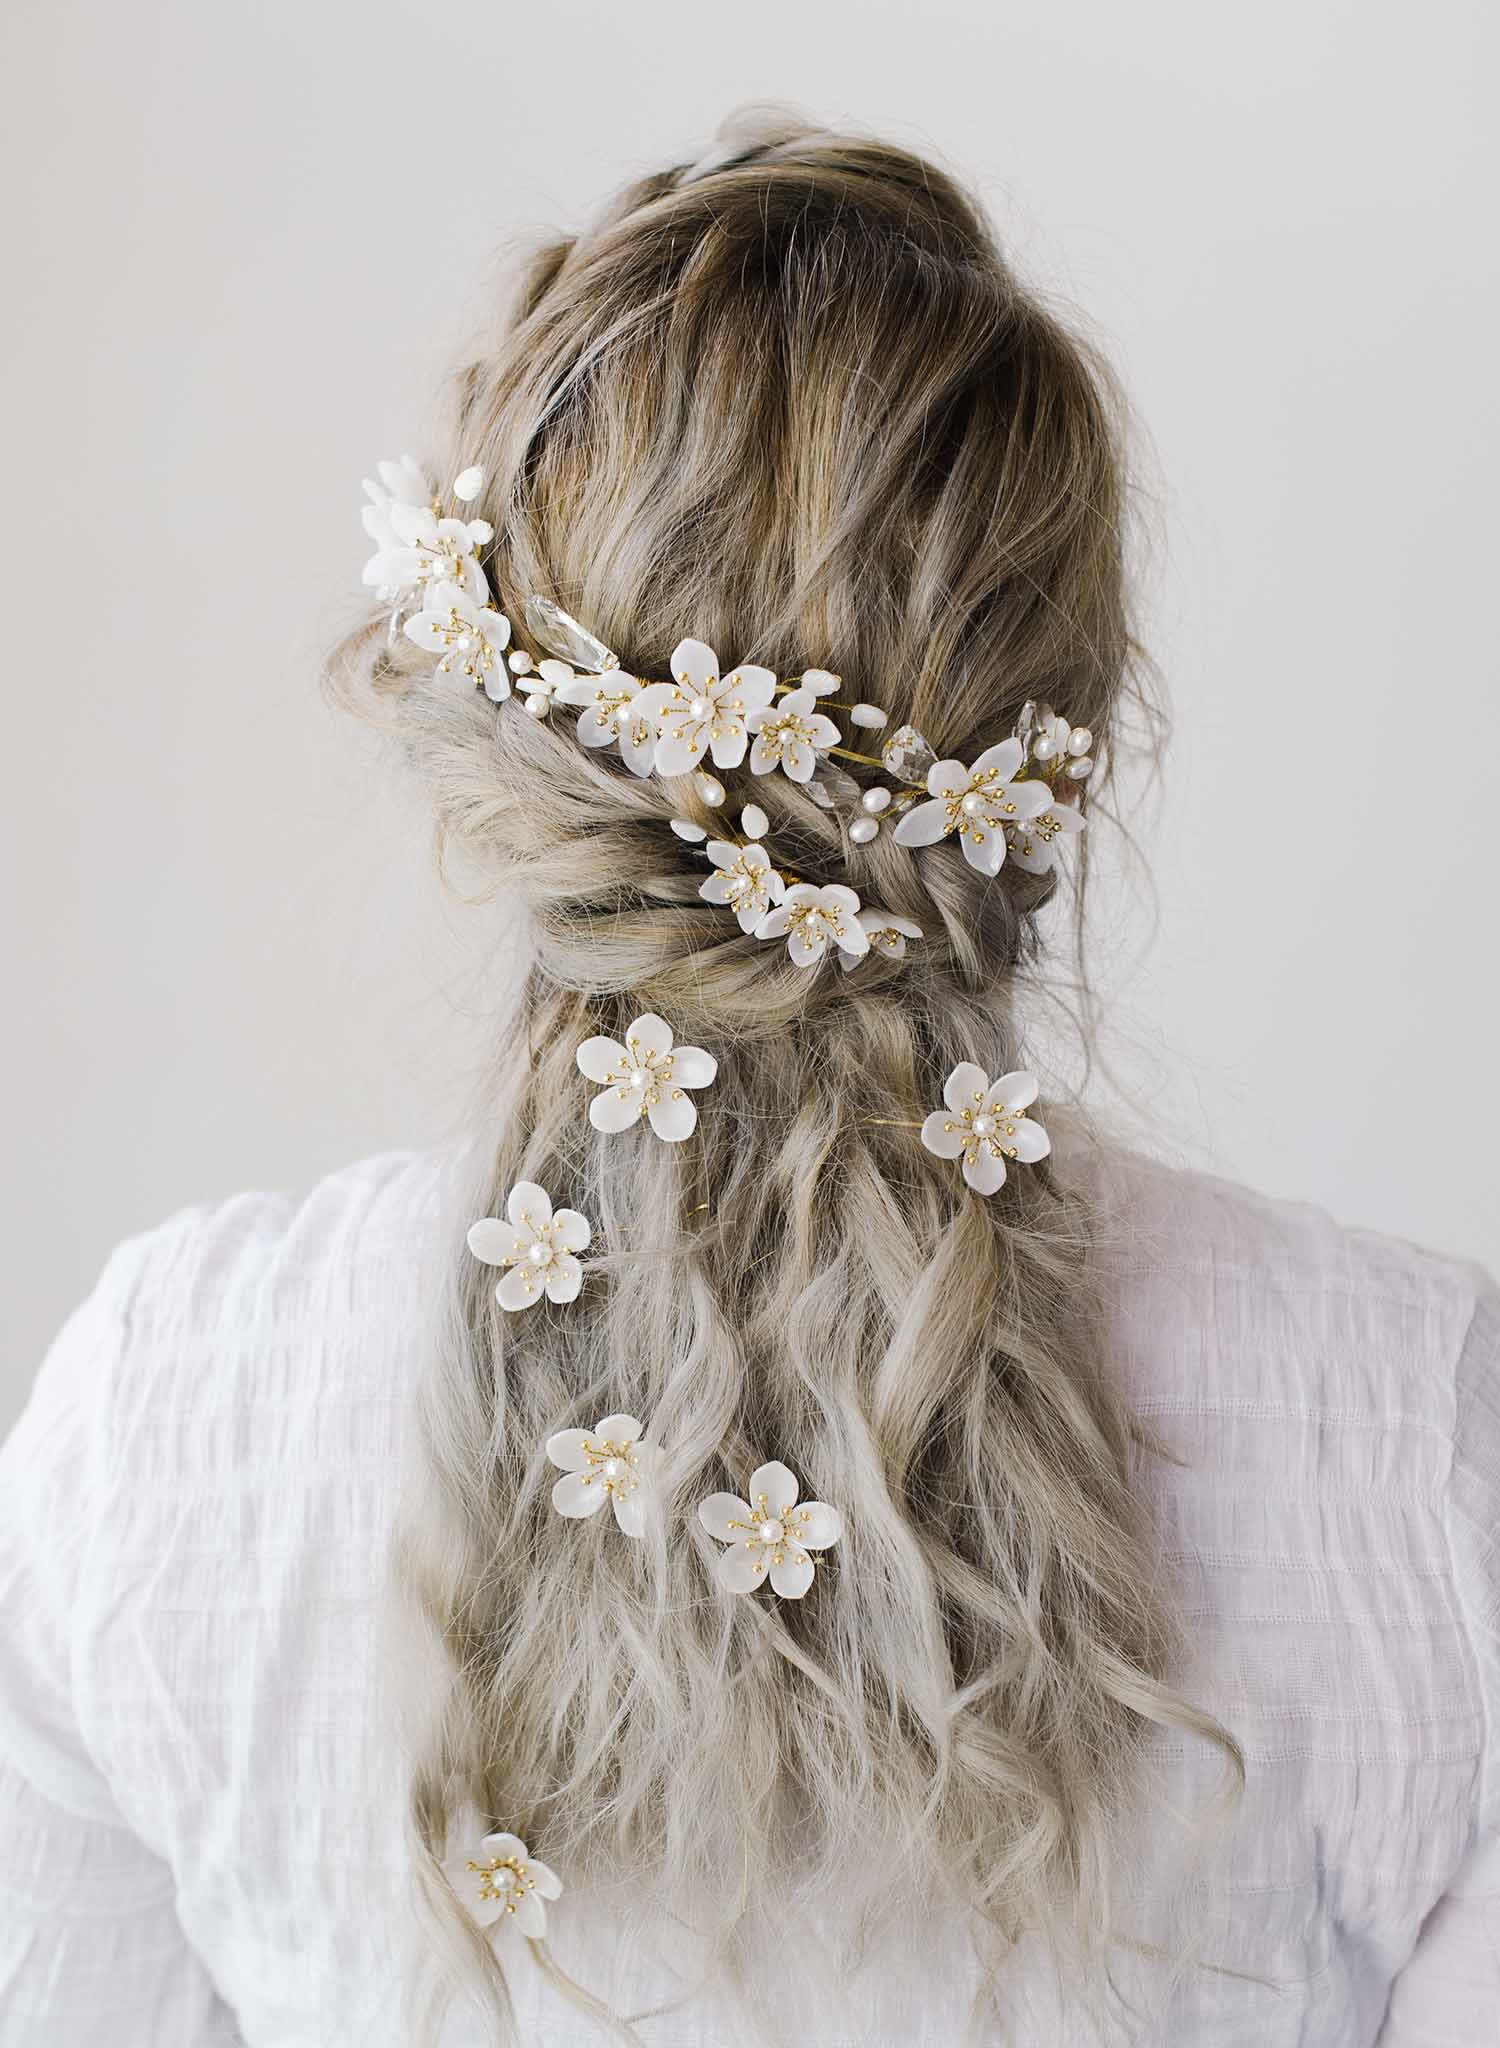 30 Stunning Yet Simple Wedding Hairstyles for All Textures